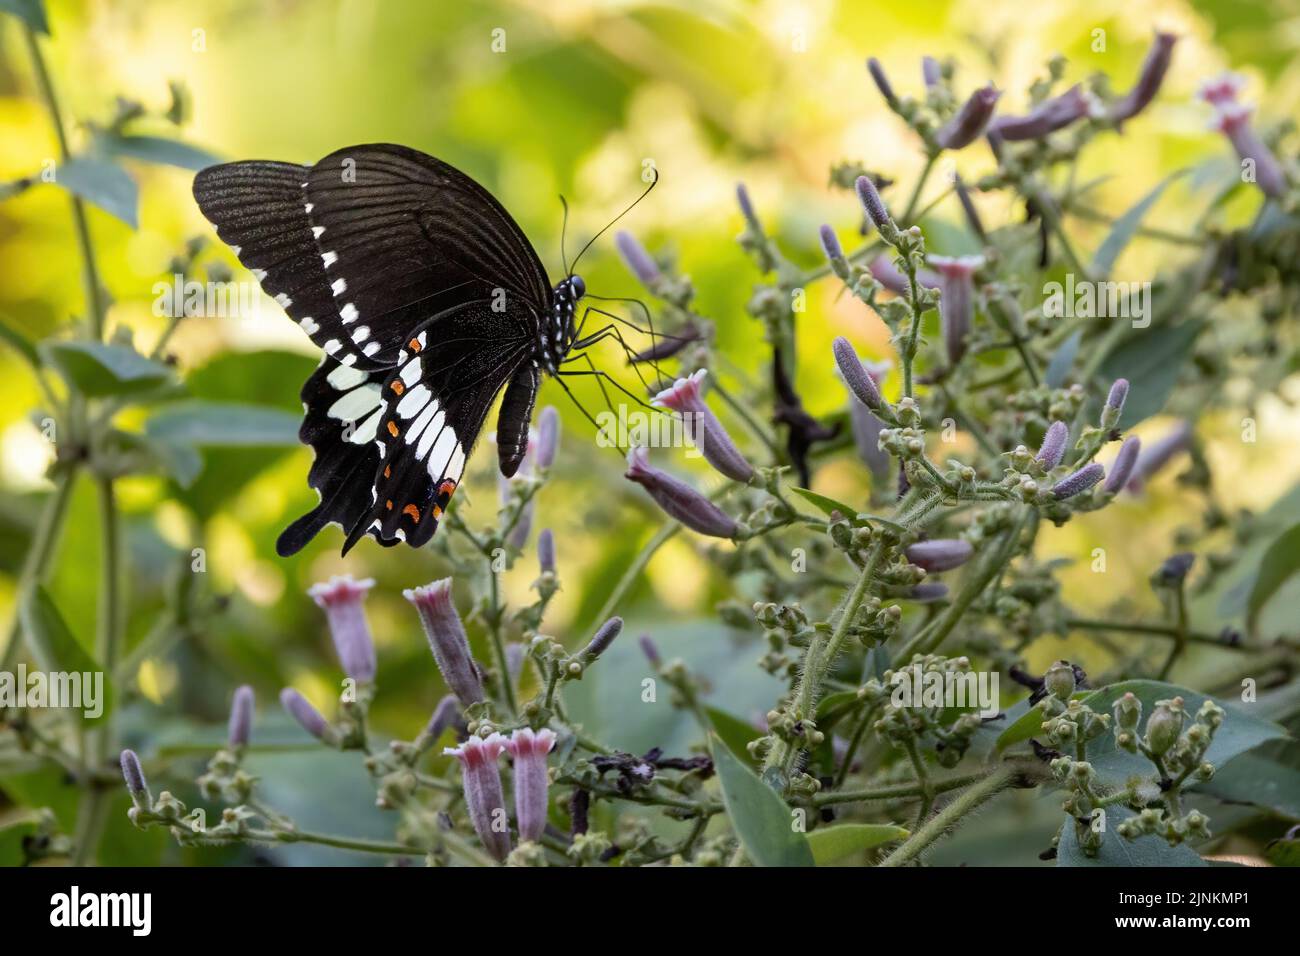 A common Mormon (Papilio Polytes) butterfly gathering pollen from wildflowers, Thailand Stock Photo